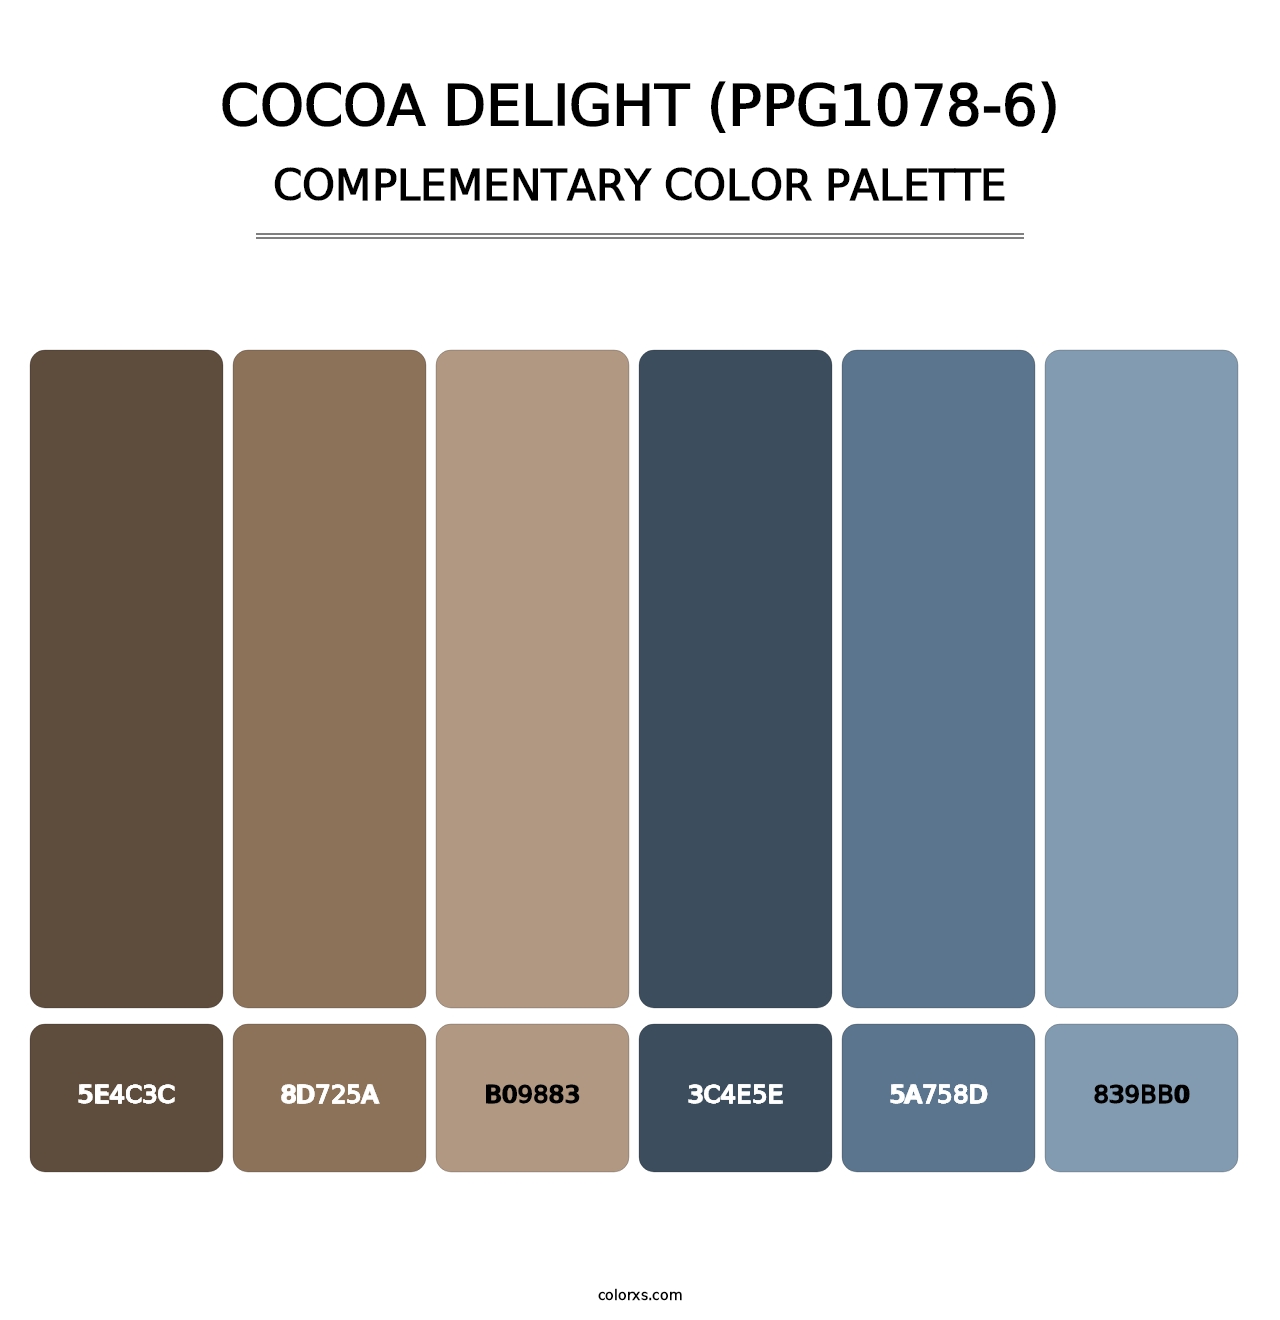 Cocoa Delight (PPG1078-6) - Complementary Color Palette